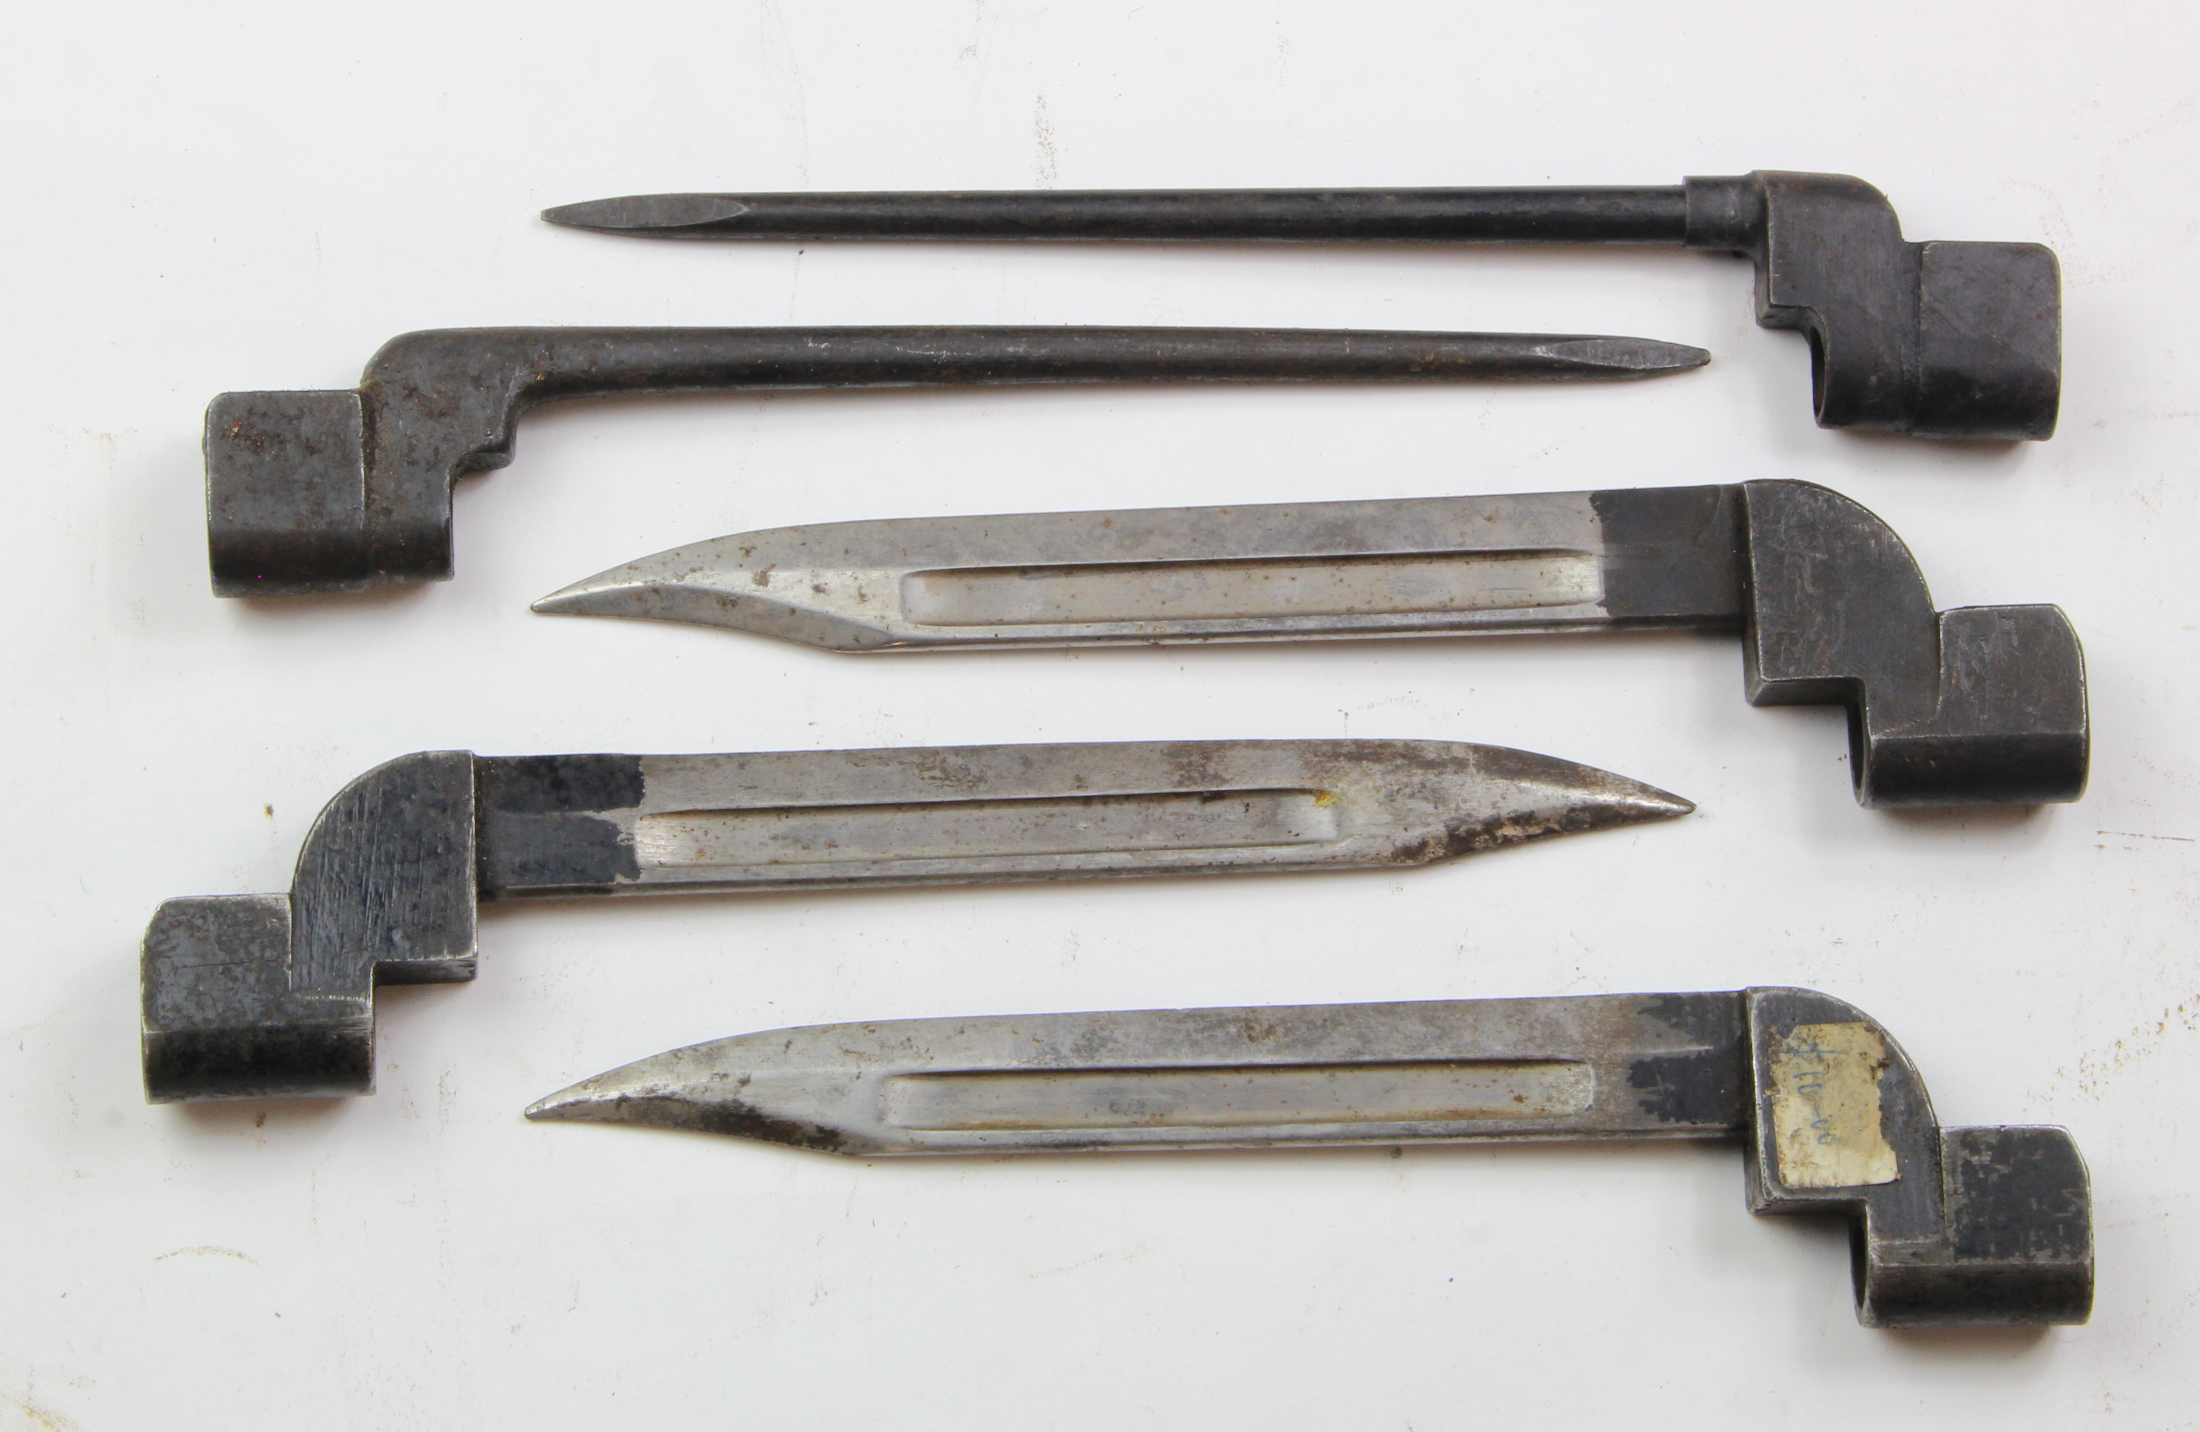 Bayonets for Enfield rifles, no scabbards. (5)